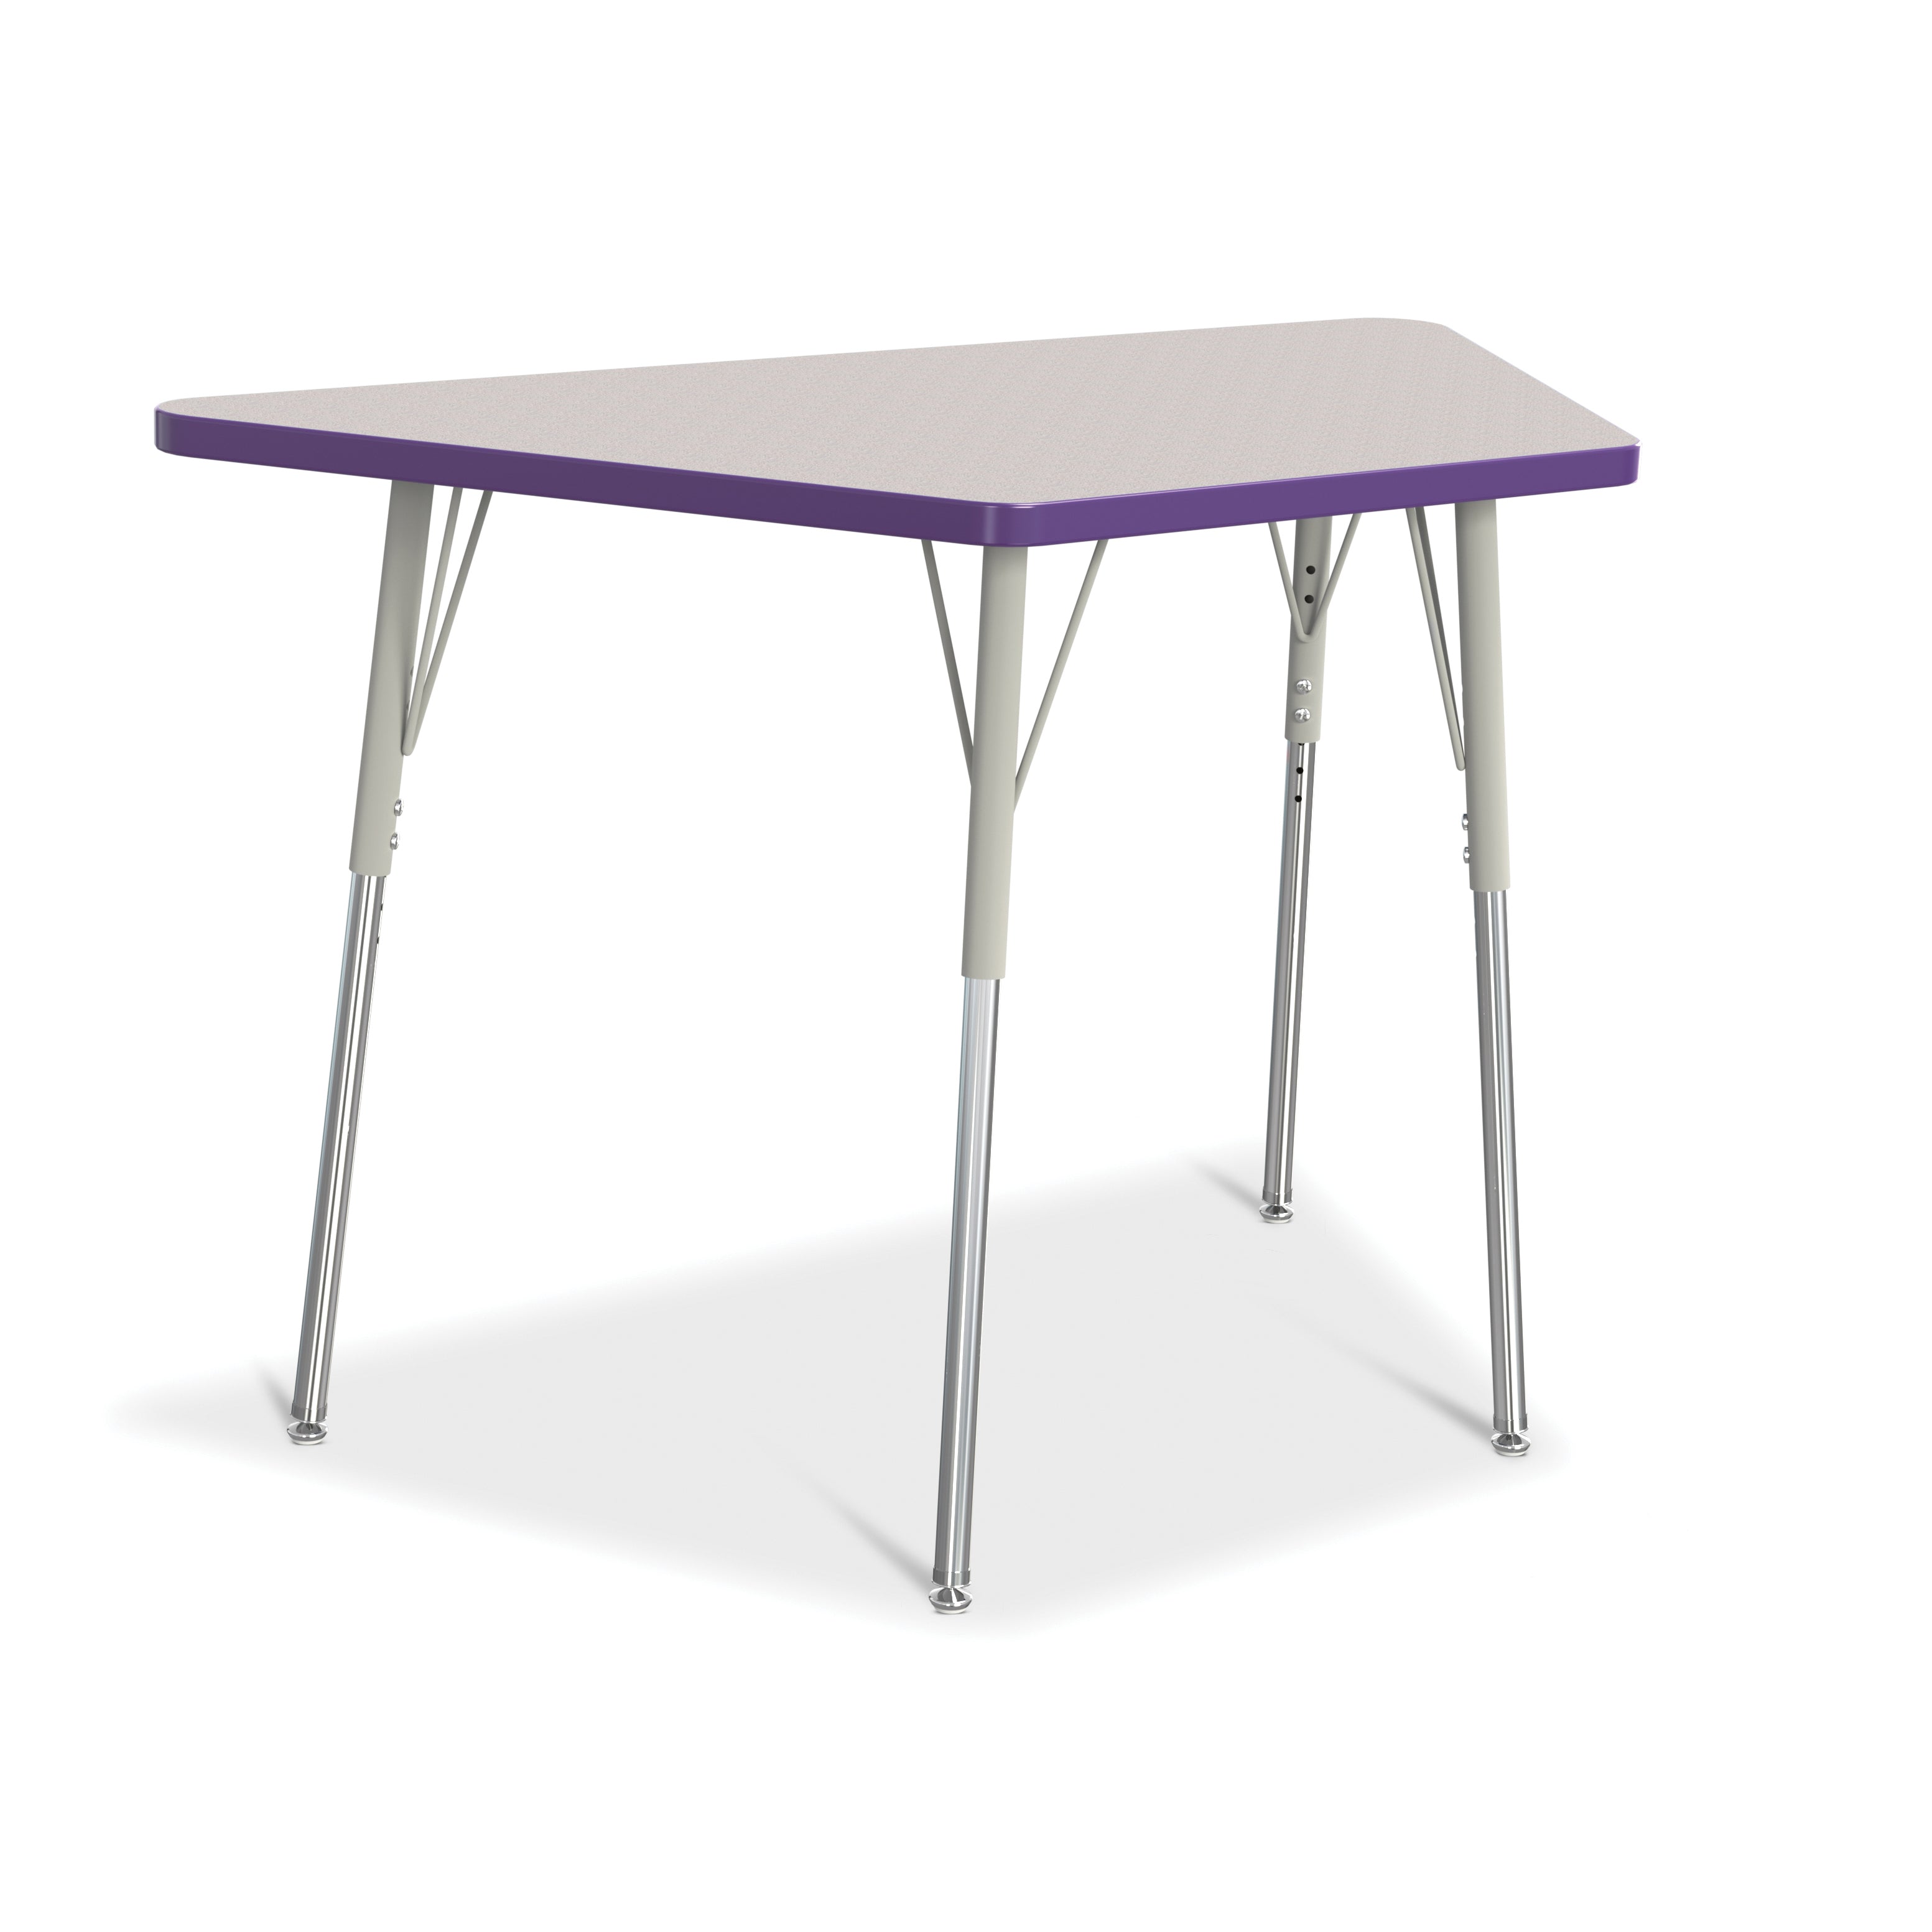 6438JCA004, Berries Trapezoid Activity Tables - 24" X 48", A-height - Freckled Gray/Purple/Gray